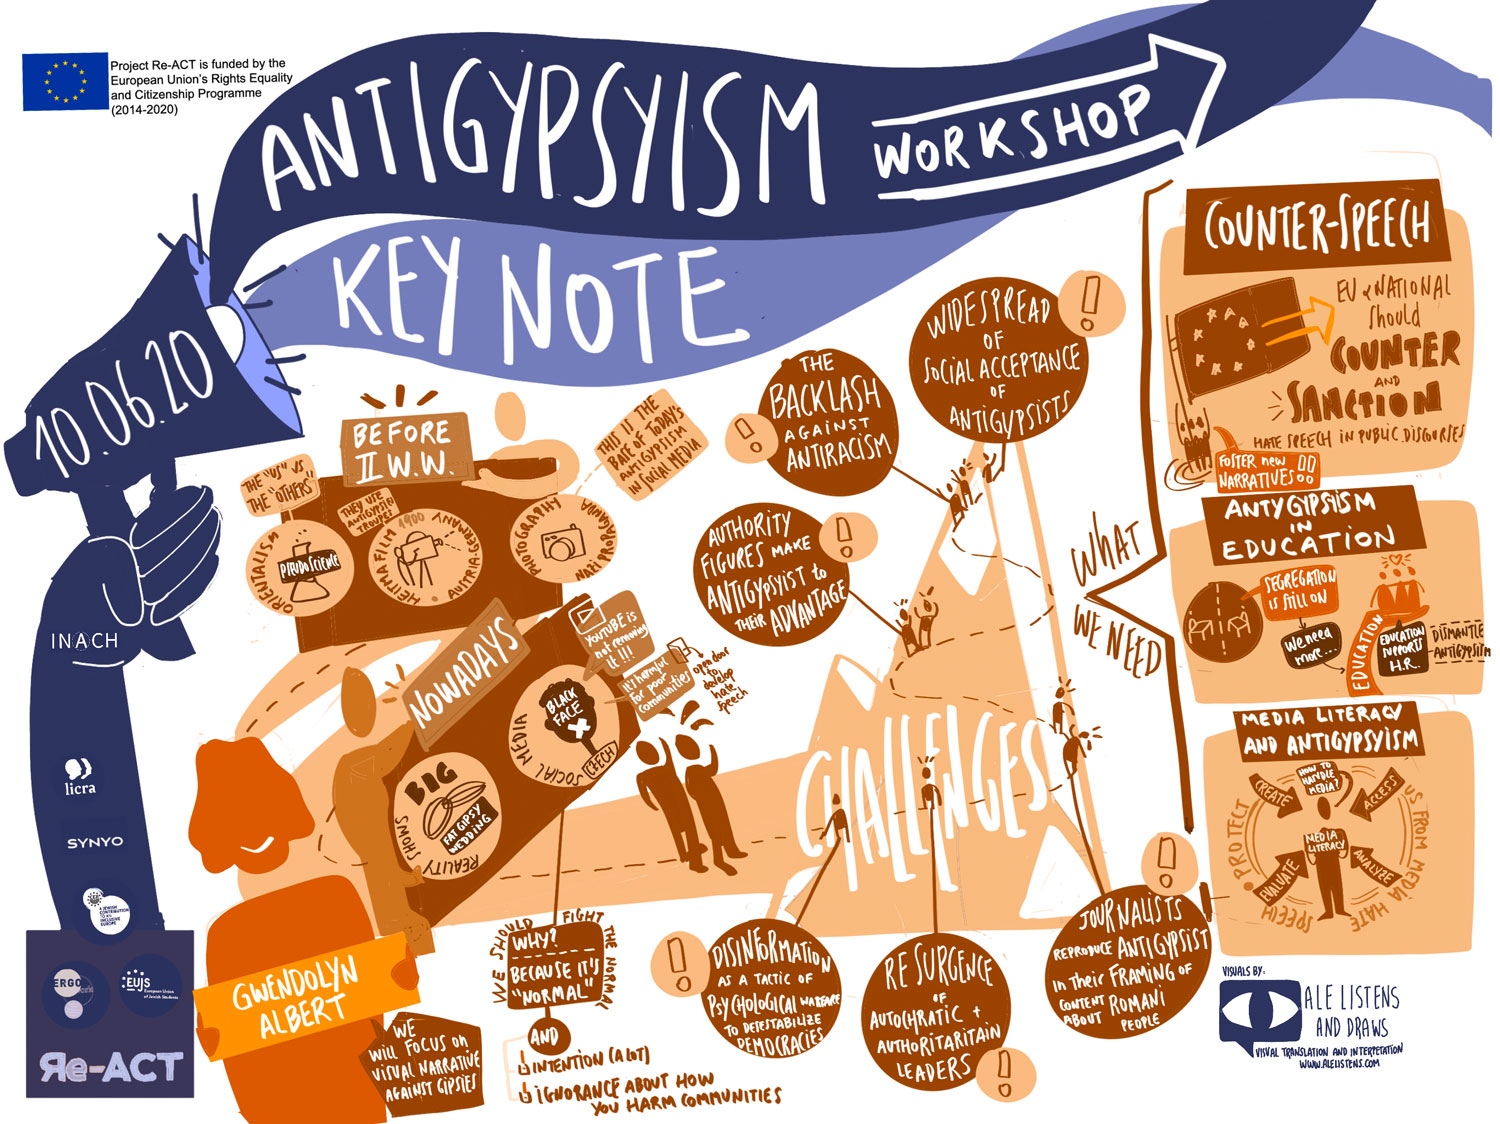 Ergo Network: Workshop On Antisemitism, Antigypsyism And Other Types Of Hate